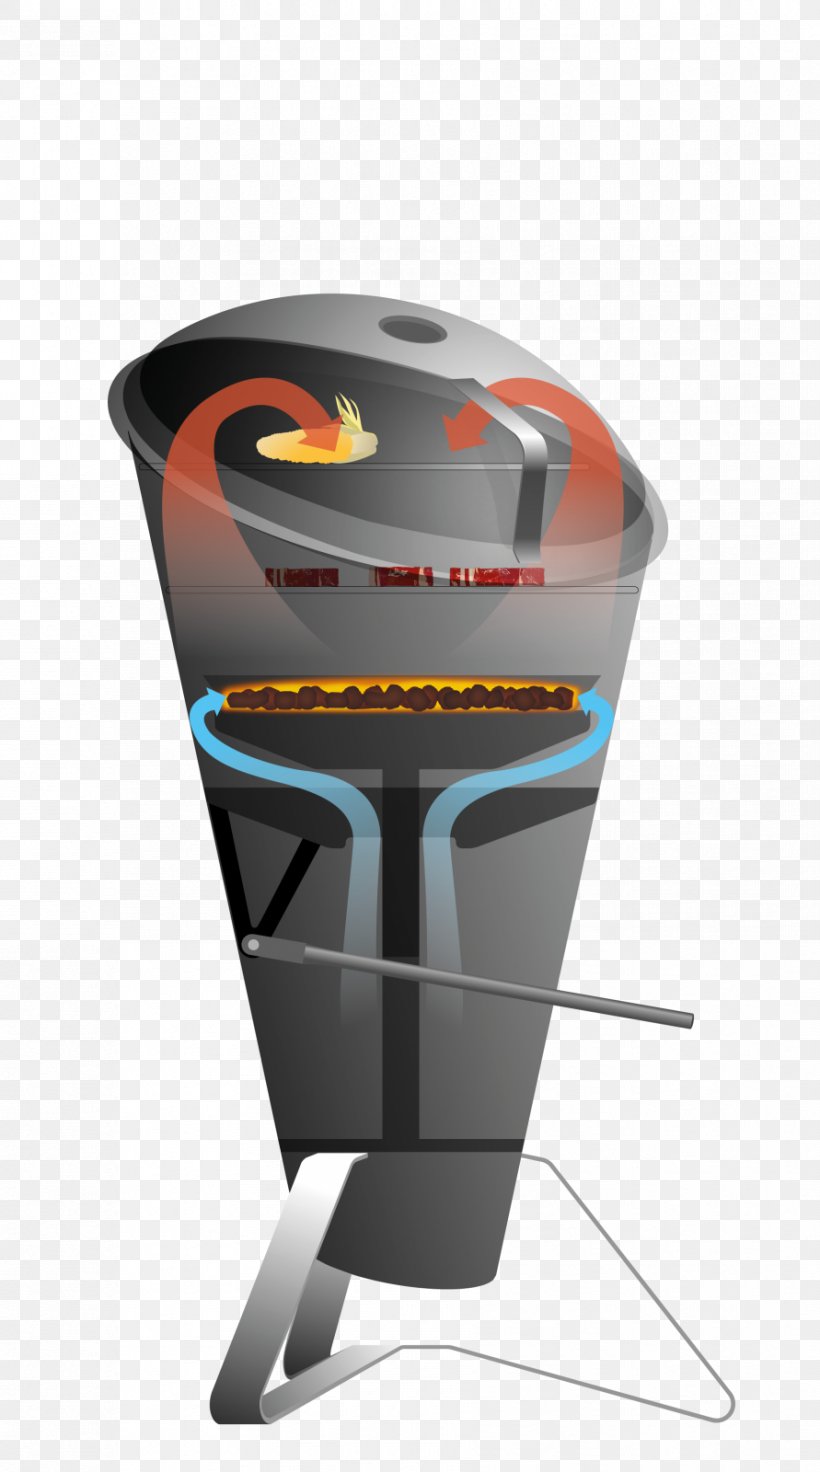 Barbecue Höfats Grill Holzkohle Cone Schwarz Grilling Höfats Grill Holzkohle Einbau Cone Inklusive Einbau Ring Cube Fire Basket Höfats, PNG, 891x1600px, Barbecue, Cooking, Feuerkorb, Furniture, Garden Download Free